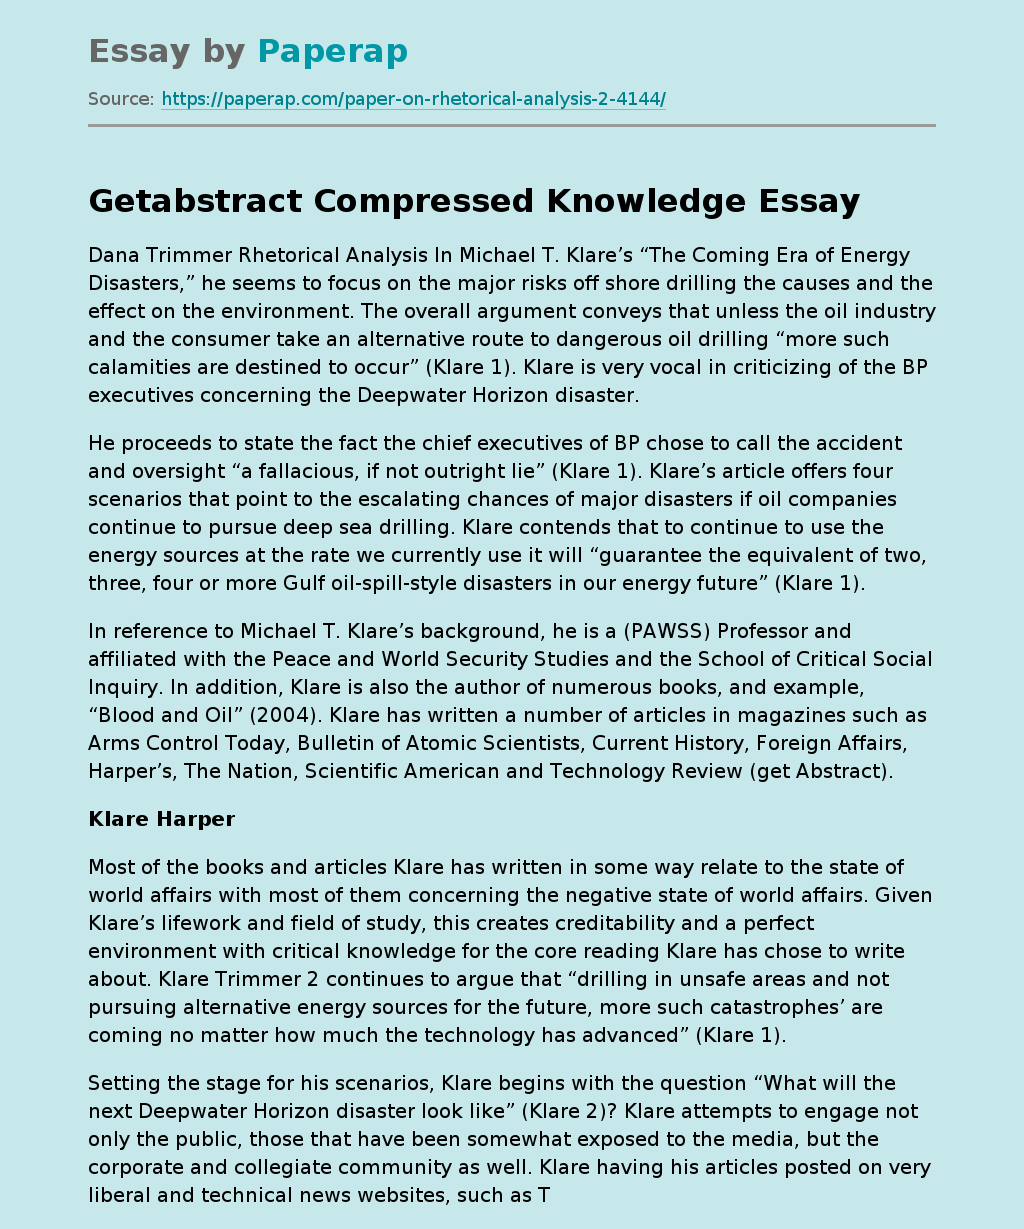 Getabstract Compressed Knowledge